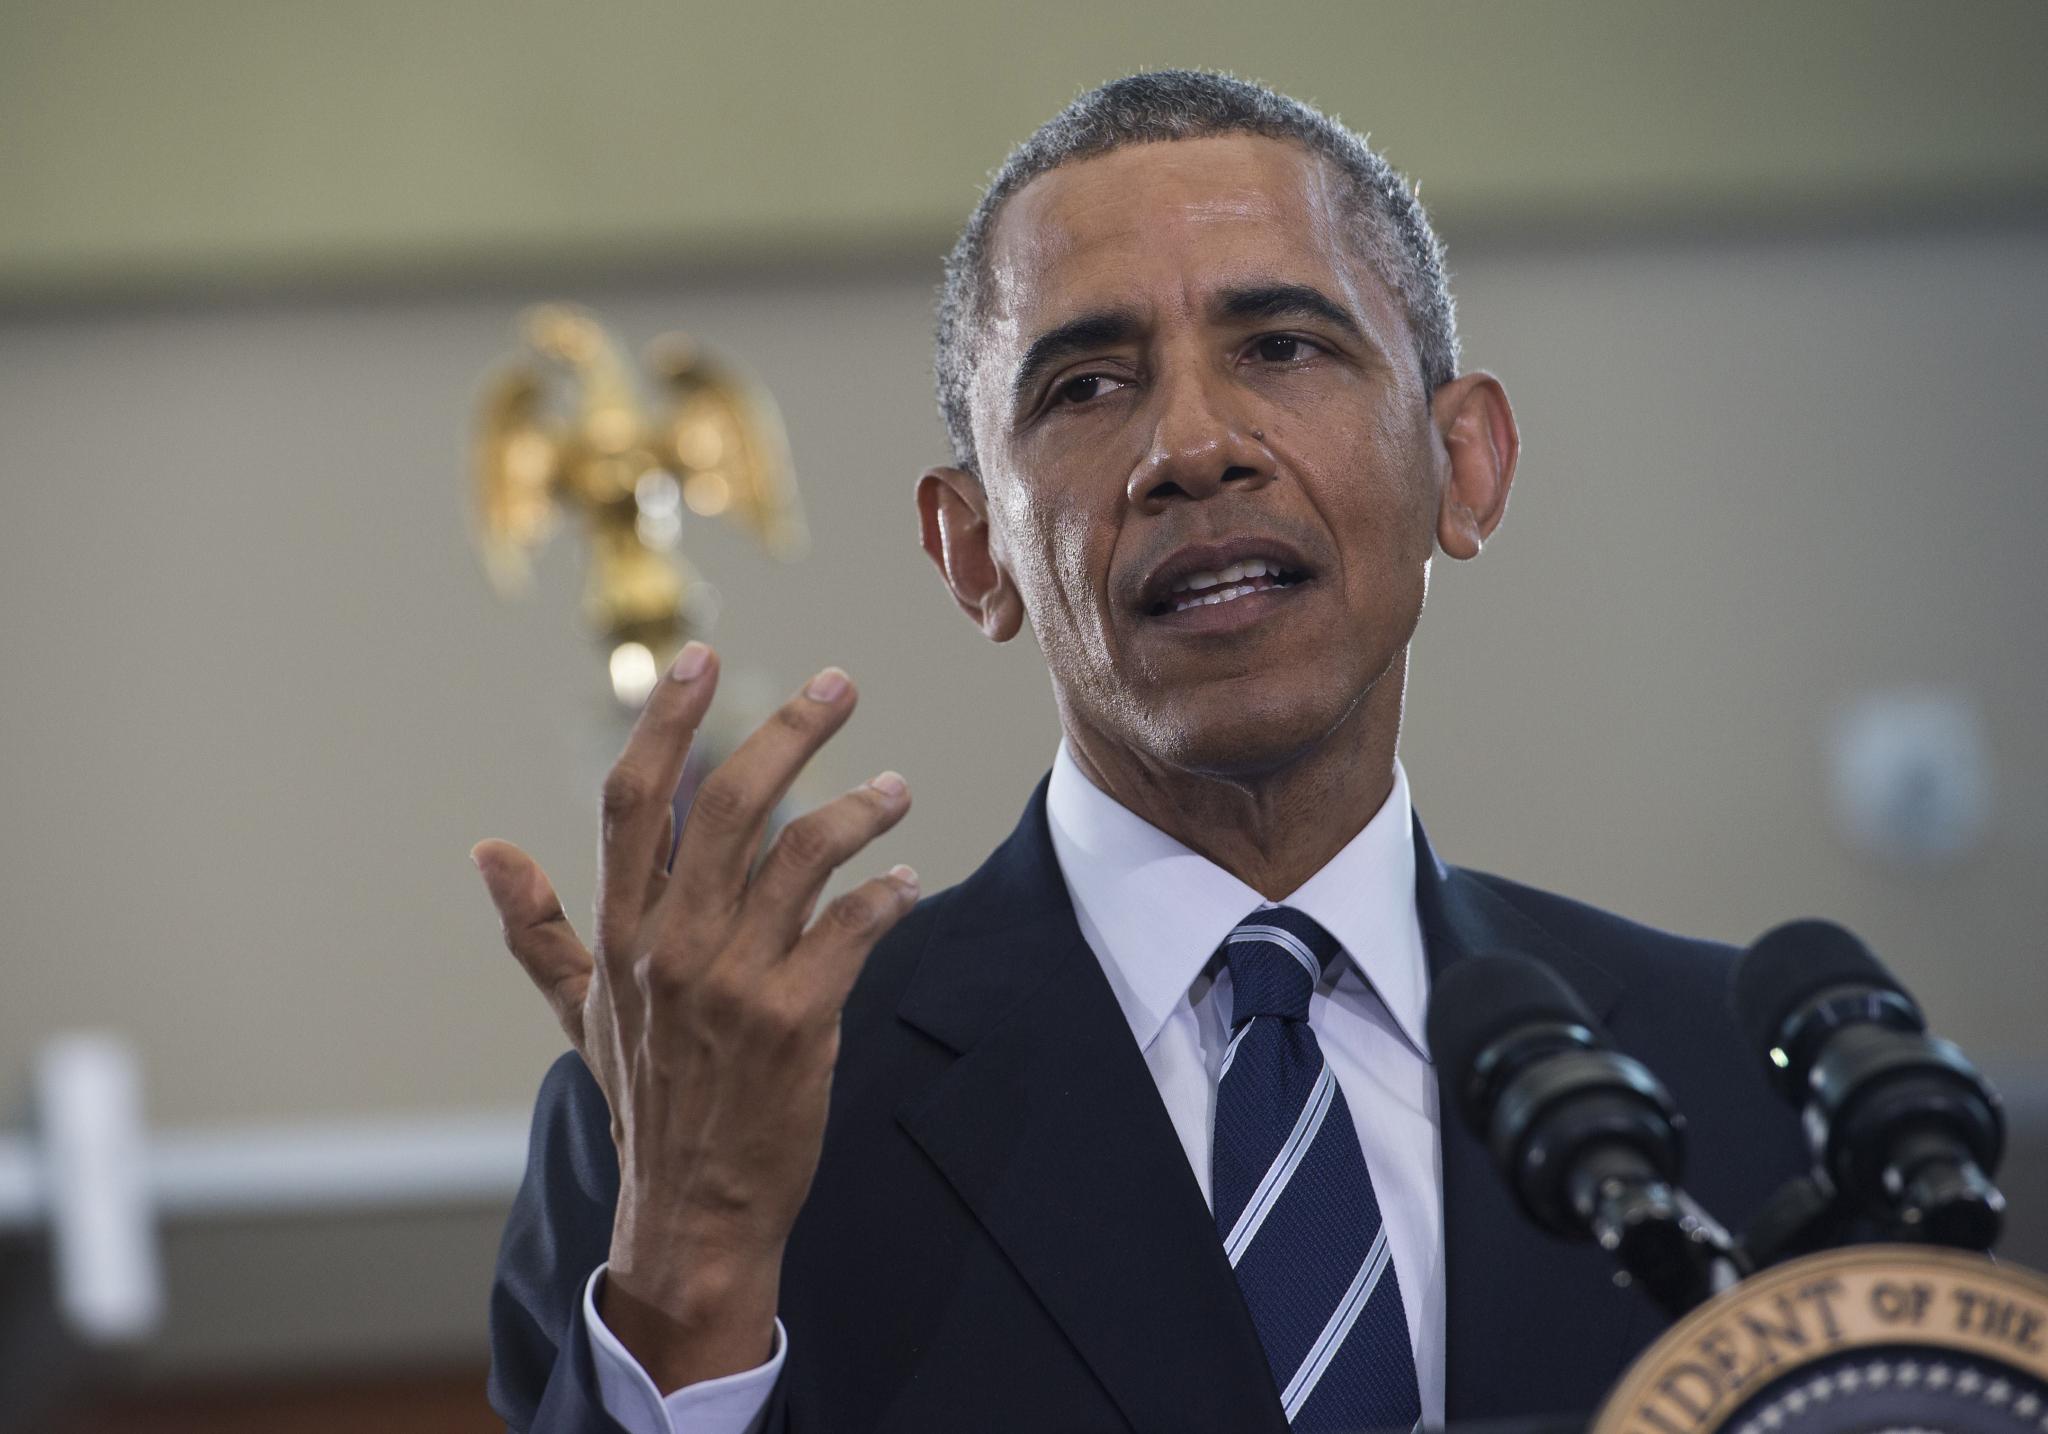 Obama Restricts Police Departments from Acquiring Military-Style Weapons